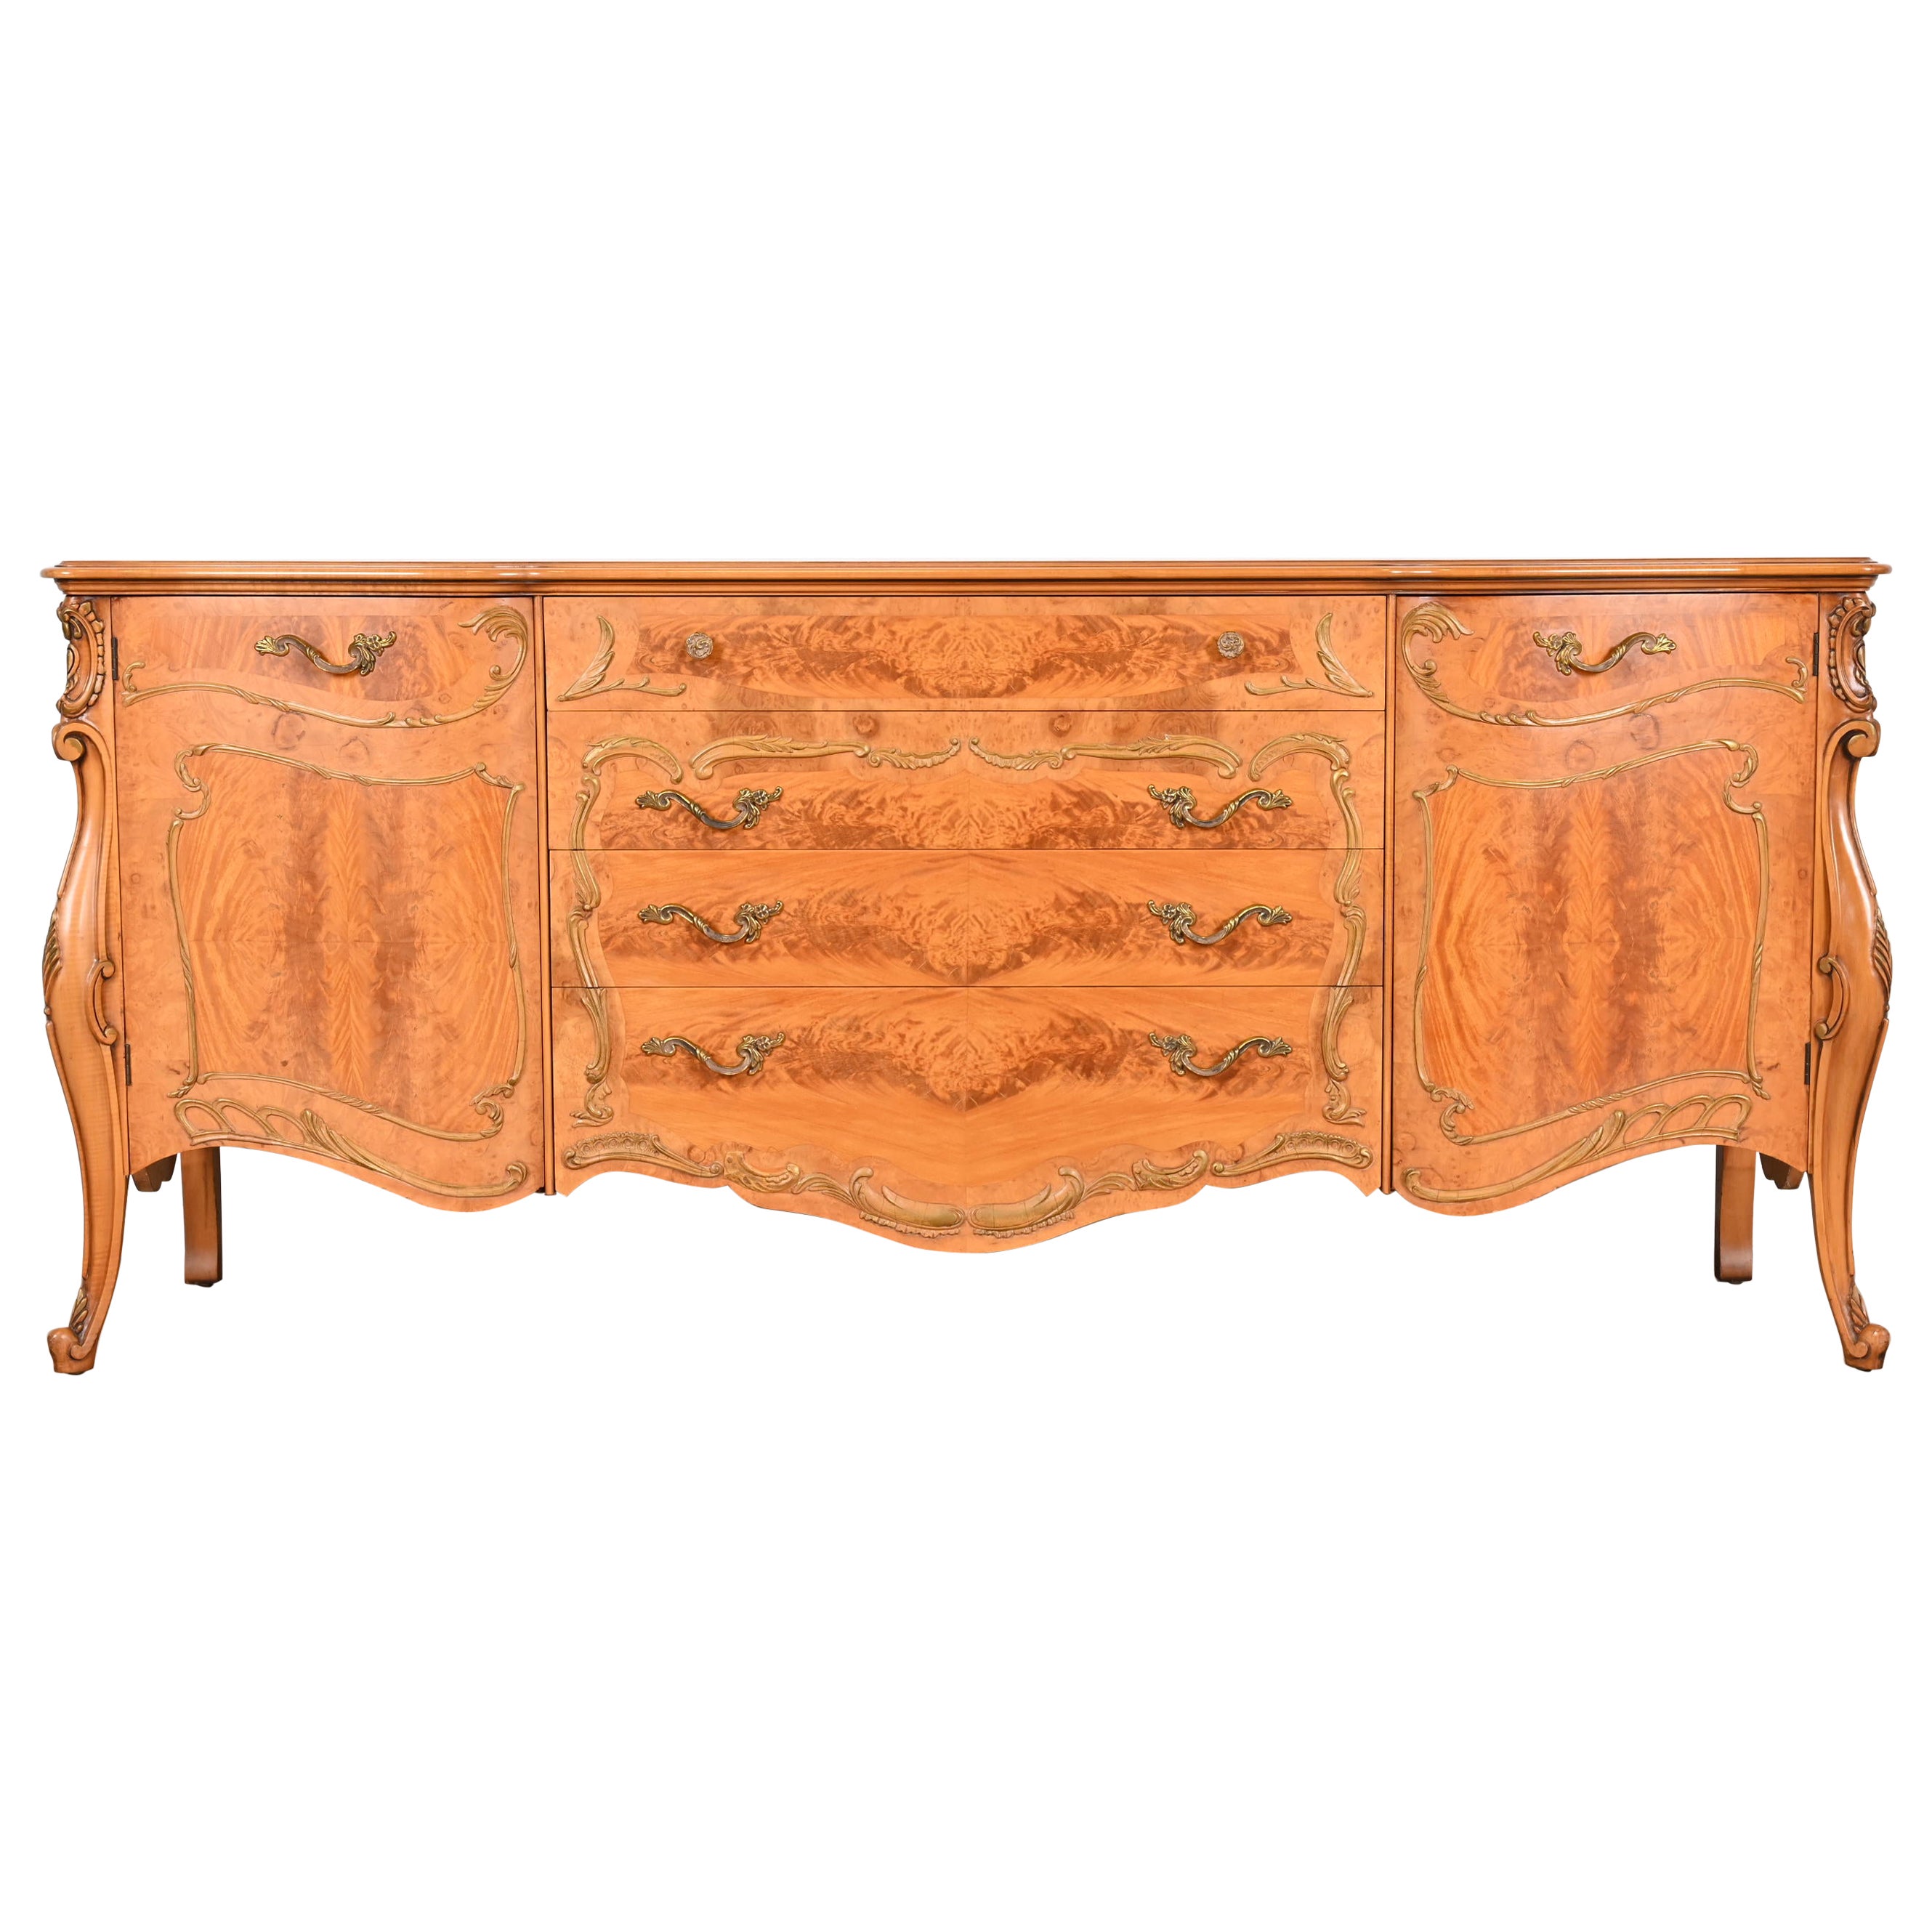 Romweber French Provincial Louis XV Burl Wood Sideboard Credenza, circa 1940s